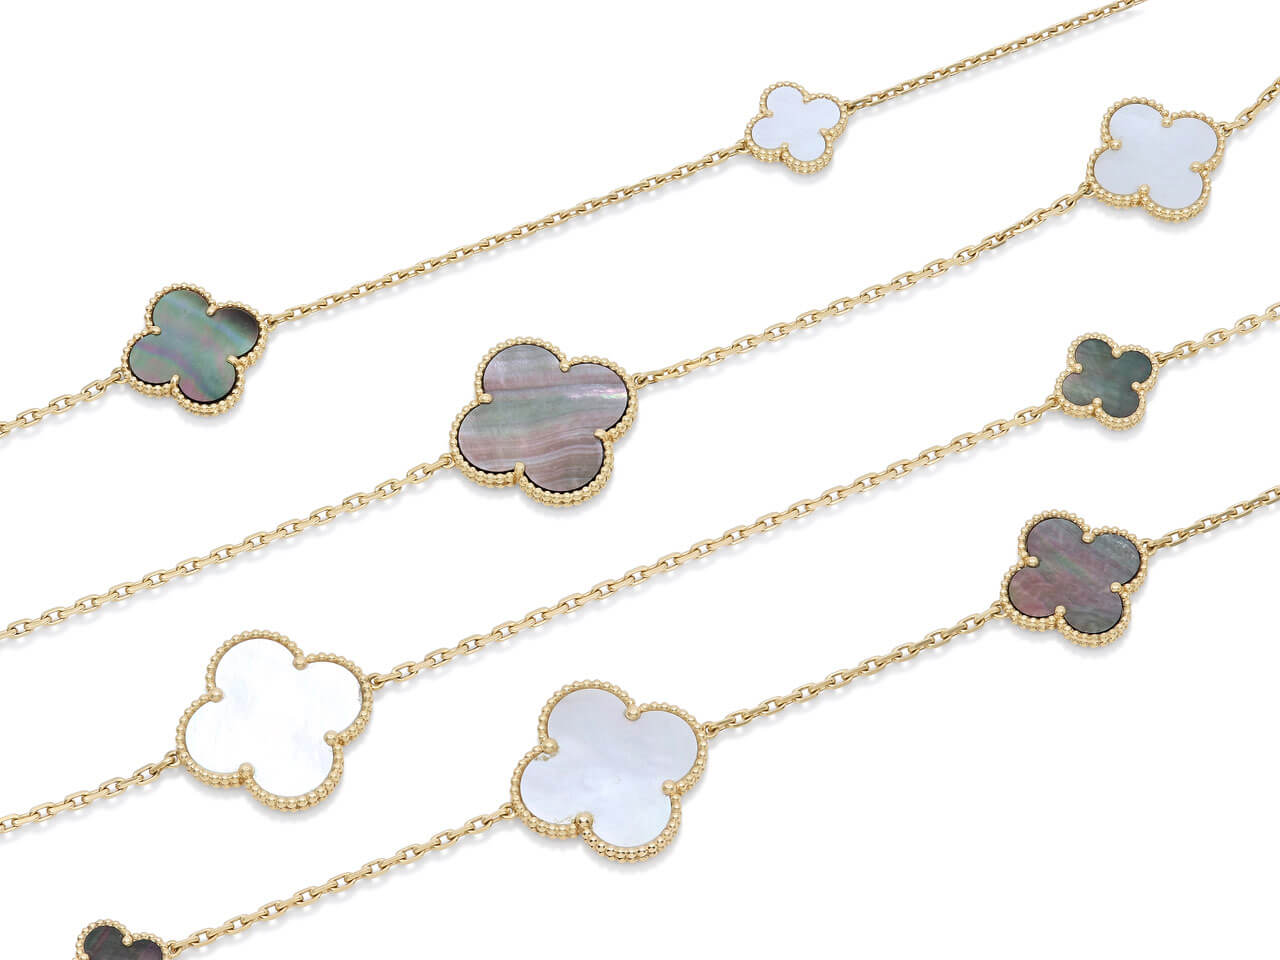 Designer Four Leaf Clover Jewelry Set With Mother Of Pearl And Green Flower  Clover Pendant Necklace, Bracelet, And Stud Earrings In Gold And Silver  With Box From Fashion_realm, $24.48 | DHgate.Com